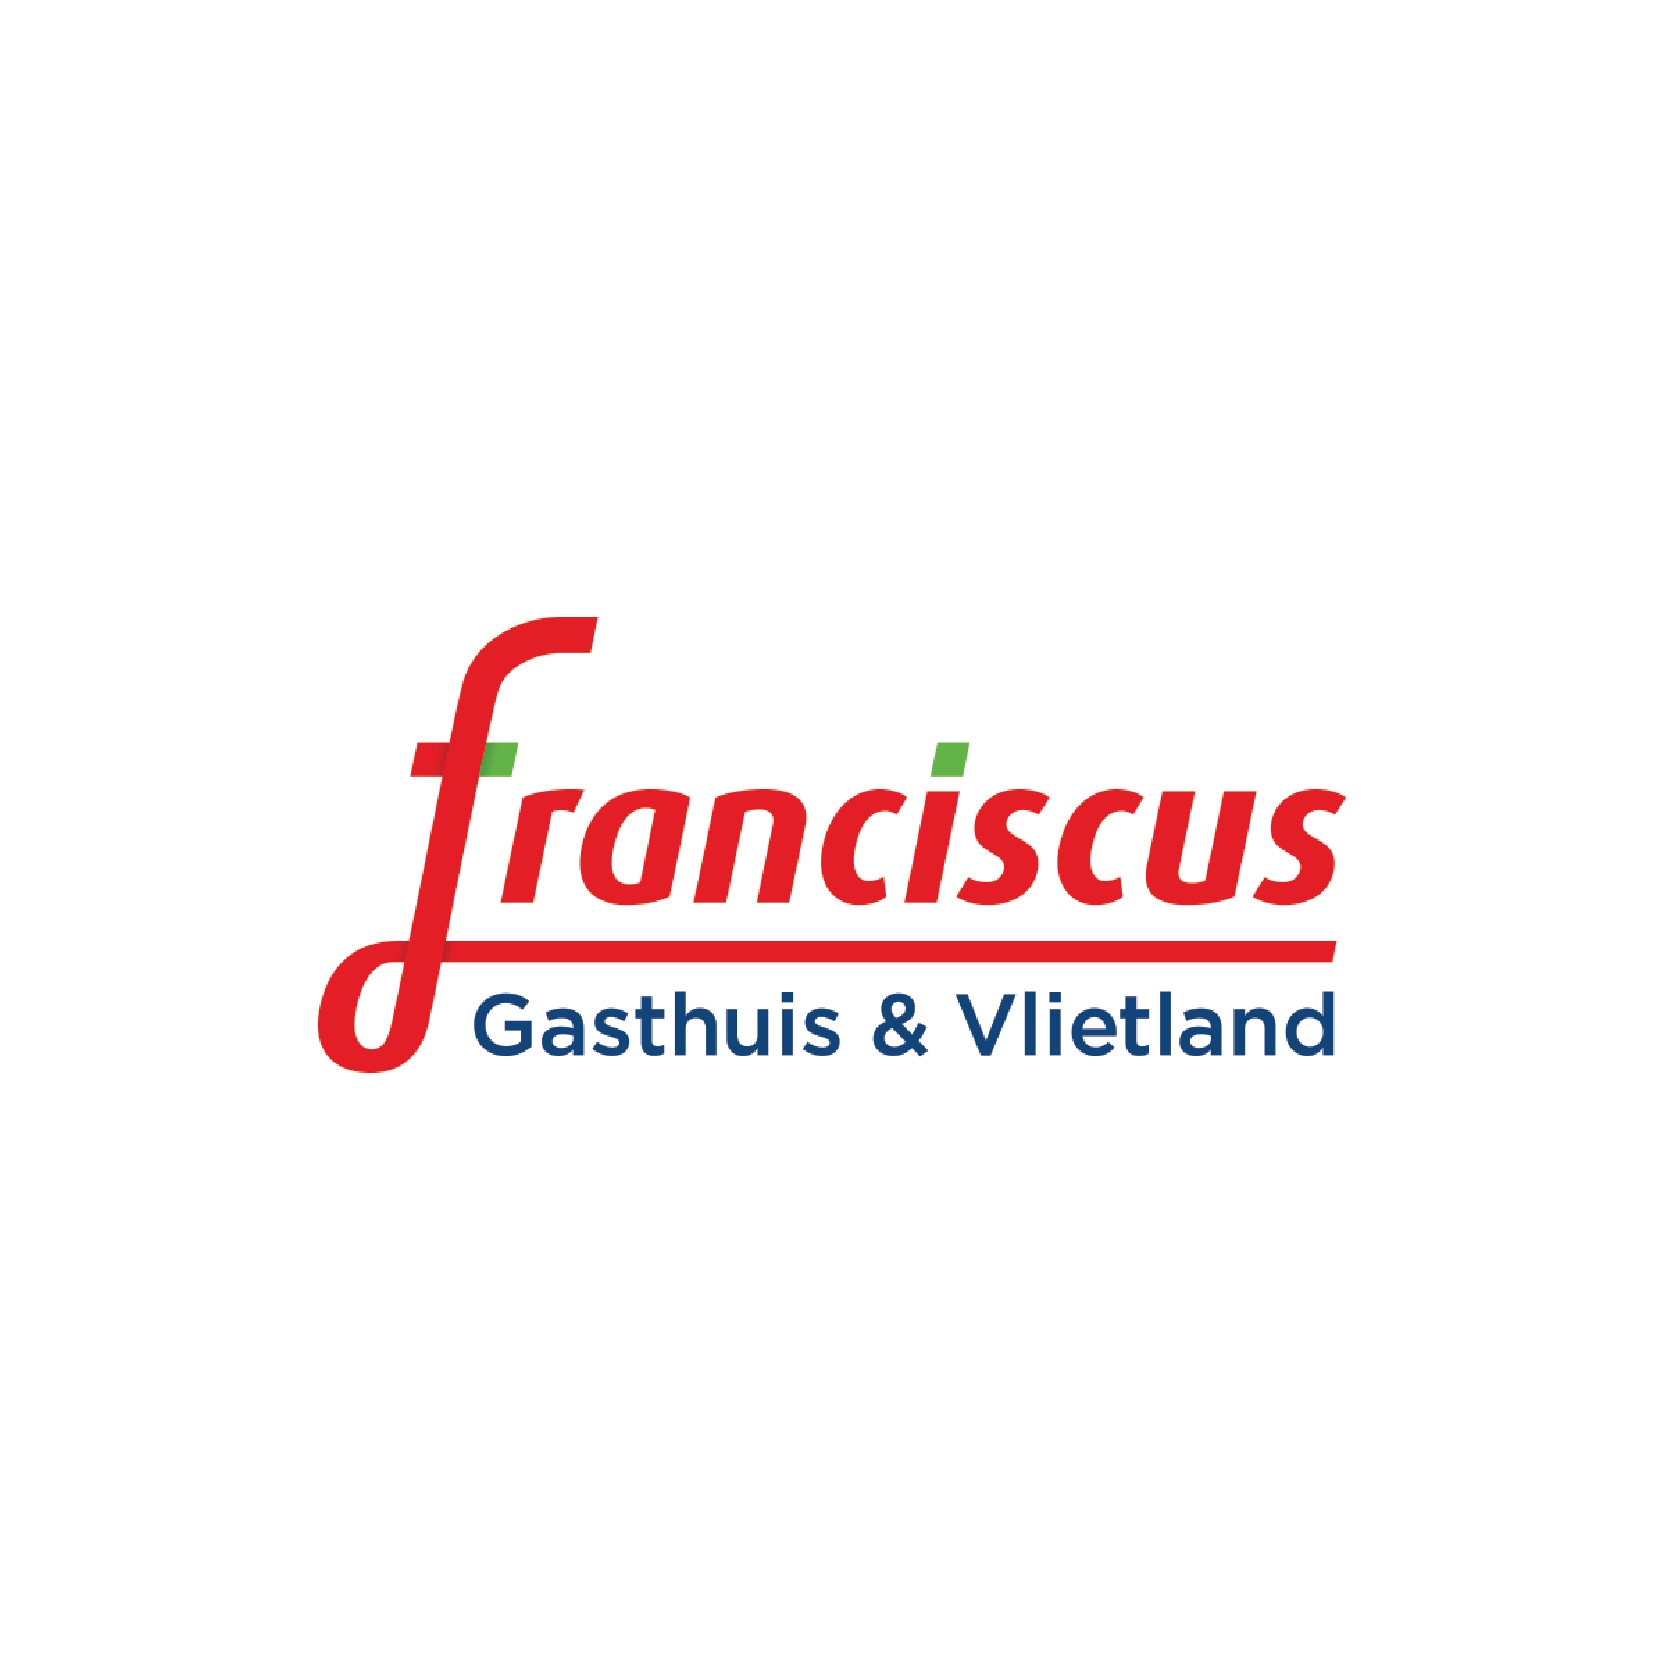 Franciscus Gasthuis